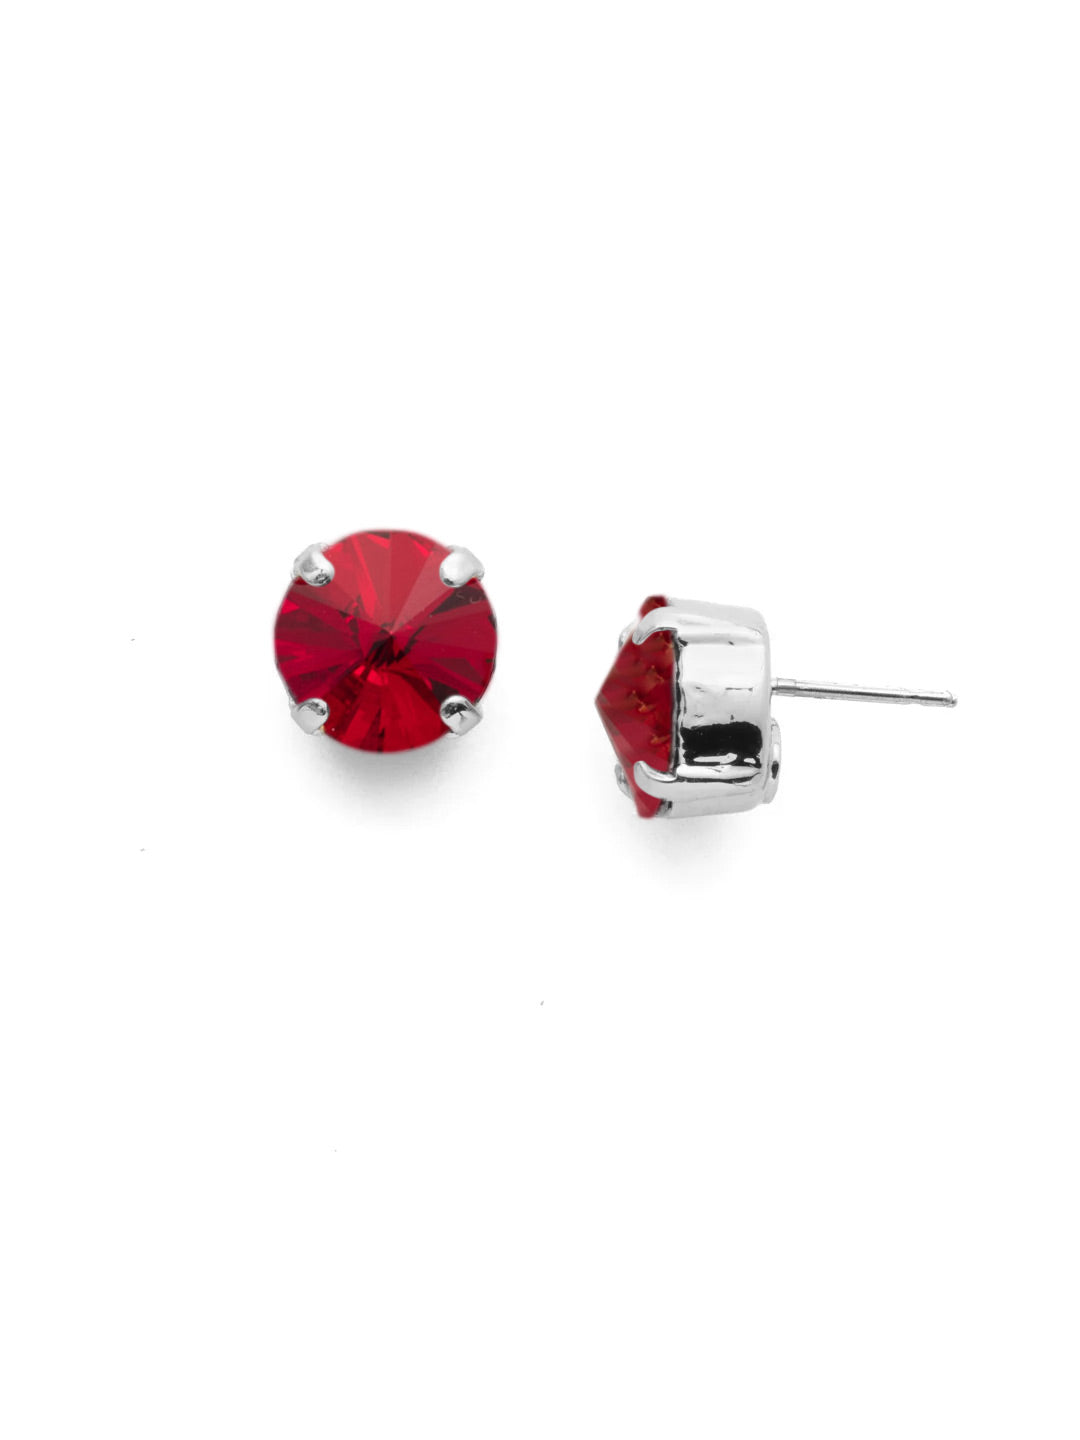 London Stud Earrings - ECM14PDSI - <p>Everyone needs a great pair of studs. Add some classic sparkle to any occasion with these stud earrings. Need help picking a stud? <a href="https://www.sorrelli.com/blogs/sisterhood/round-stud-earrings-101-a-rundown-of-sizes-styles-and-sparkle">Check out our size guide!</a> From Sorrelli's Siam collection in our Palladium finish.</p>